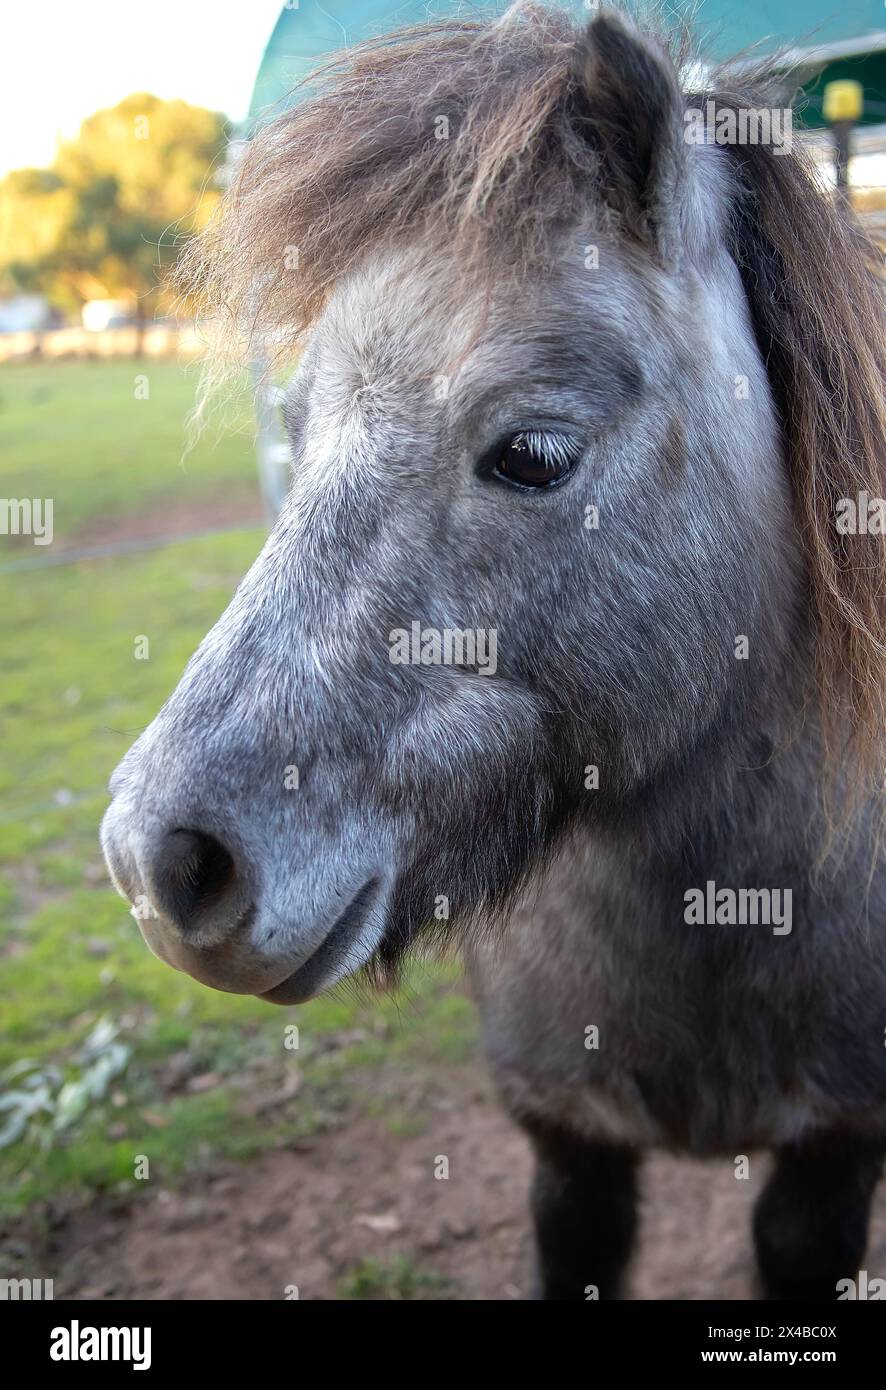 Little grey horse, Shetland pony, head and mane close-up, portrait of an animal, grazes on green grass, cute animal Stock Photo